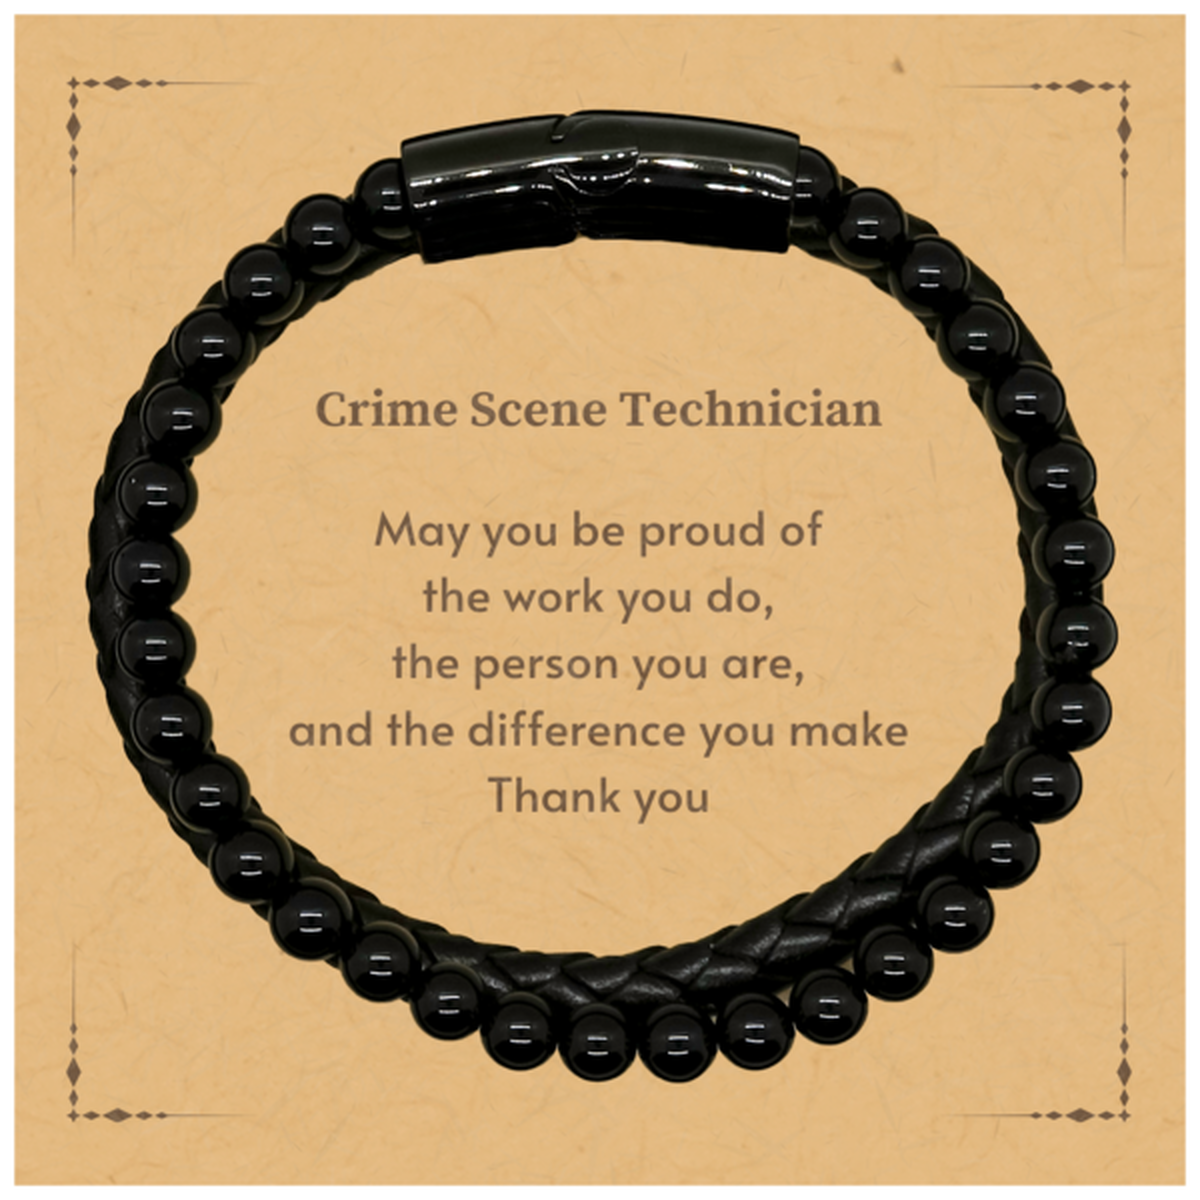 Heartwarming Stone Leather Bracelets Retirement Coworkers Gifts for Crime Scene Technician, Crime Scene Technician May You be proud of the work you do, the person you are Gifts for Boss Men Women Friends